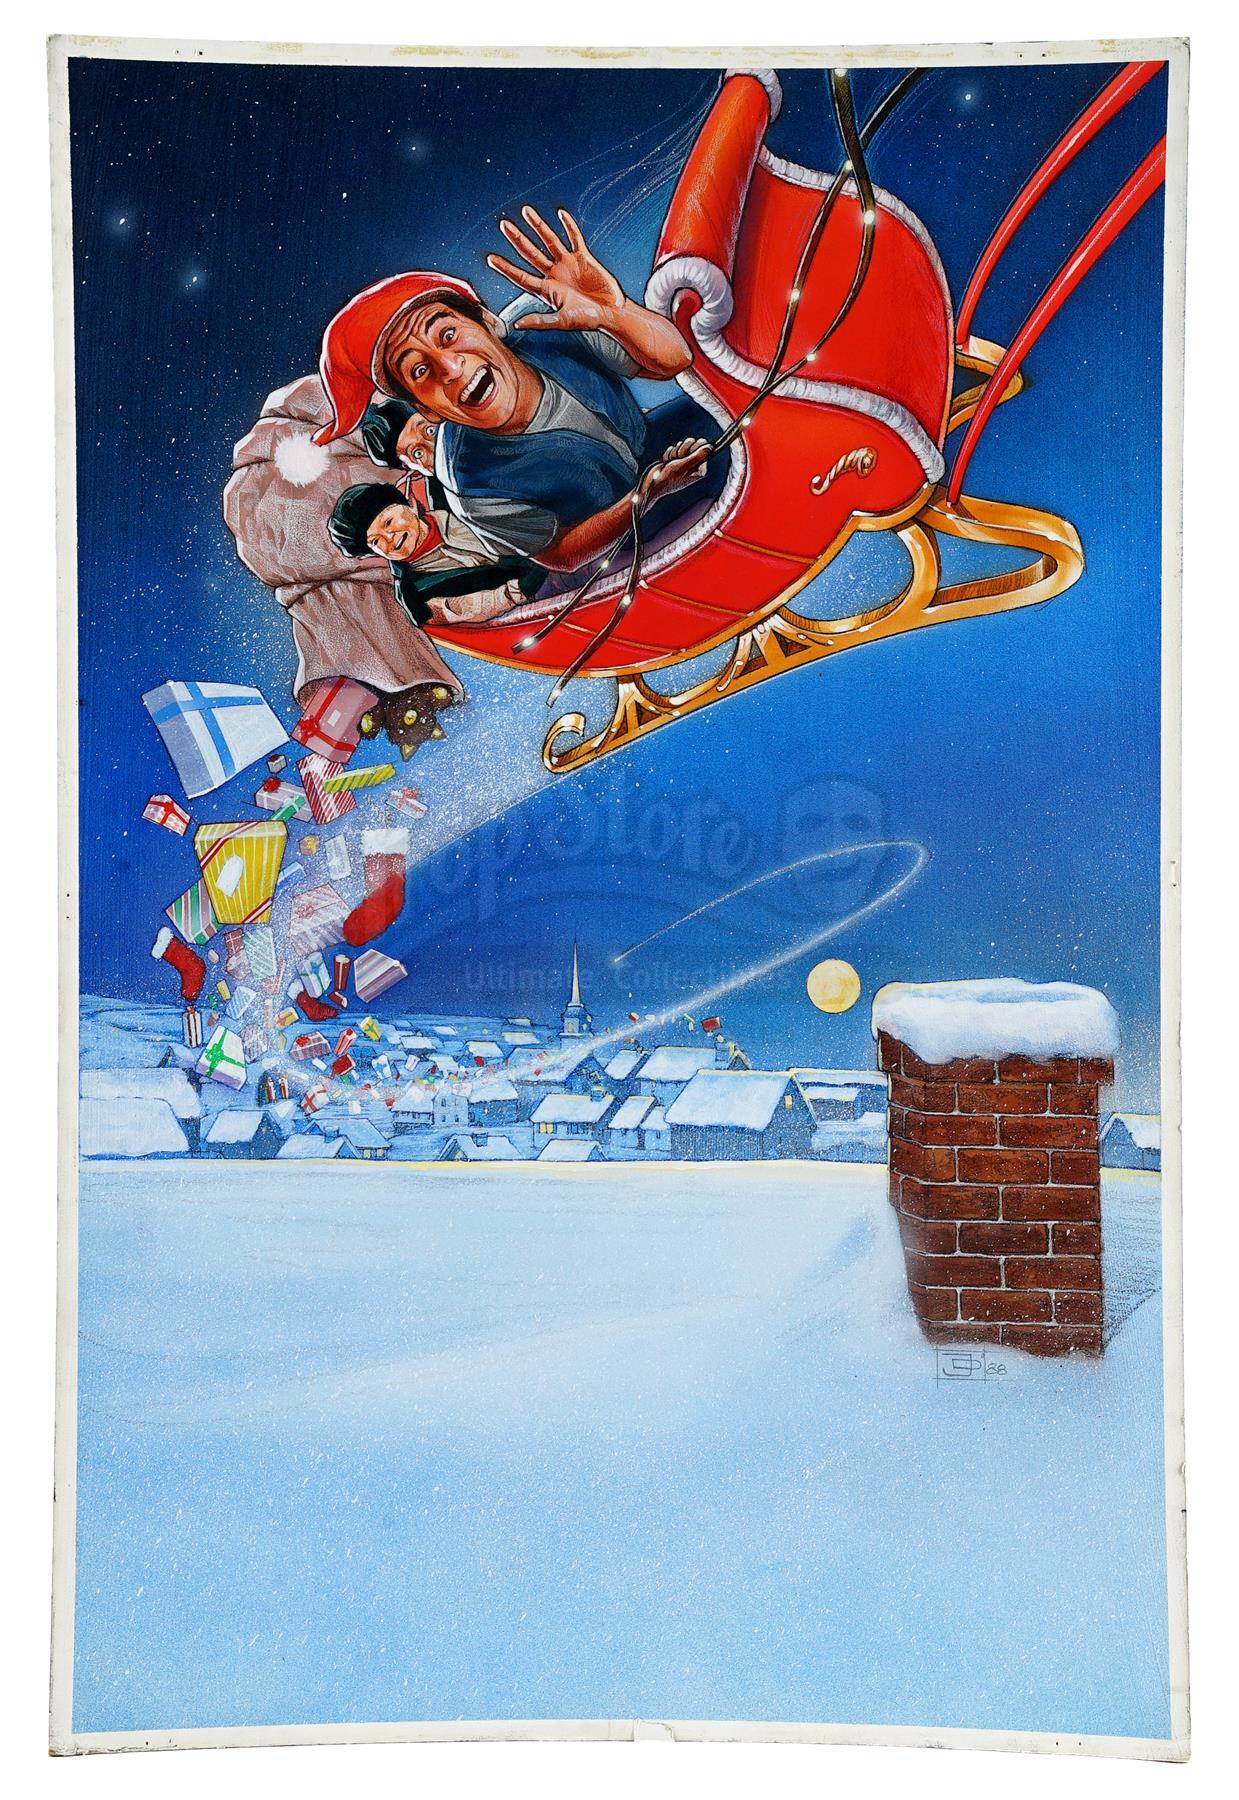 Lot # 73: ERNEST SAVES CHRISTMAS - Hand-Painted One-Sheet Artwork